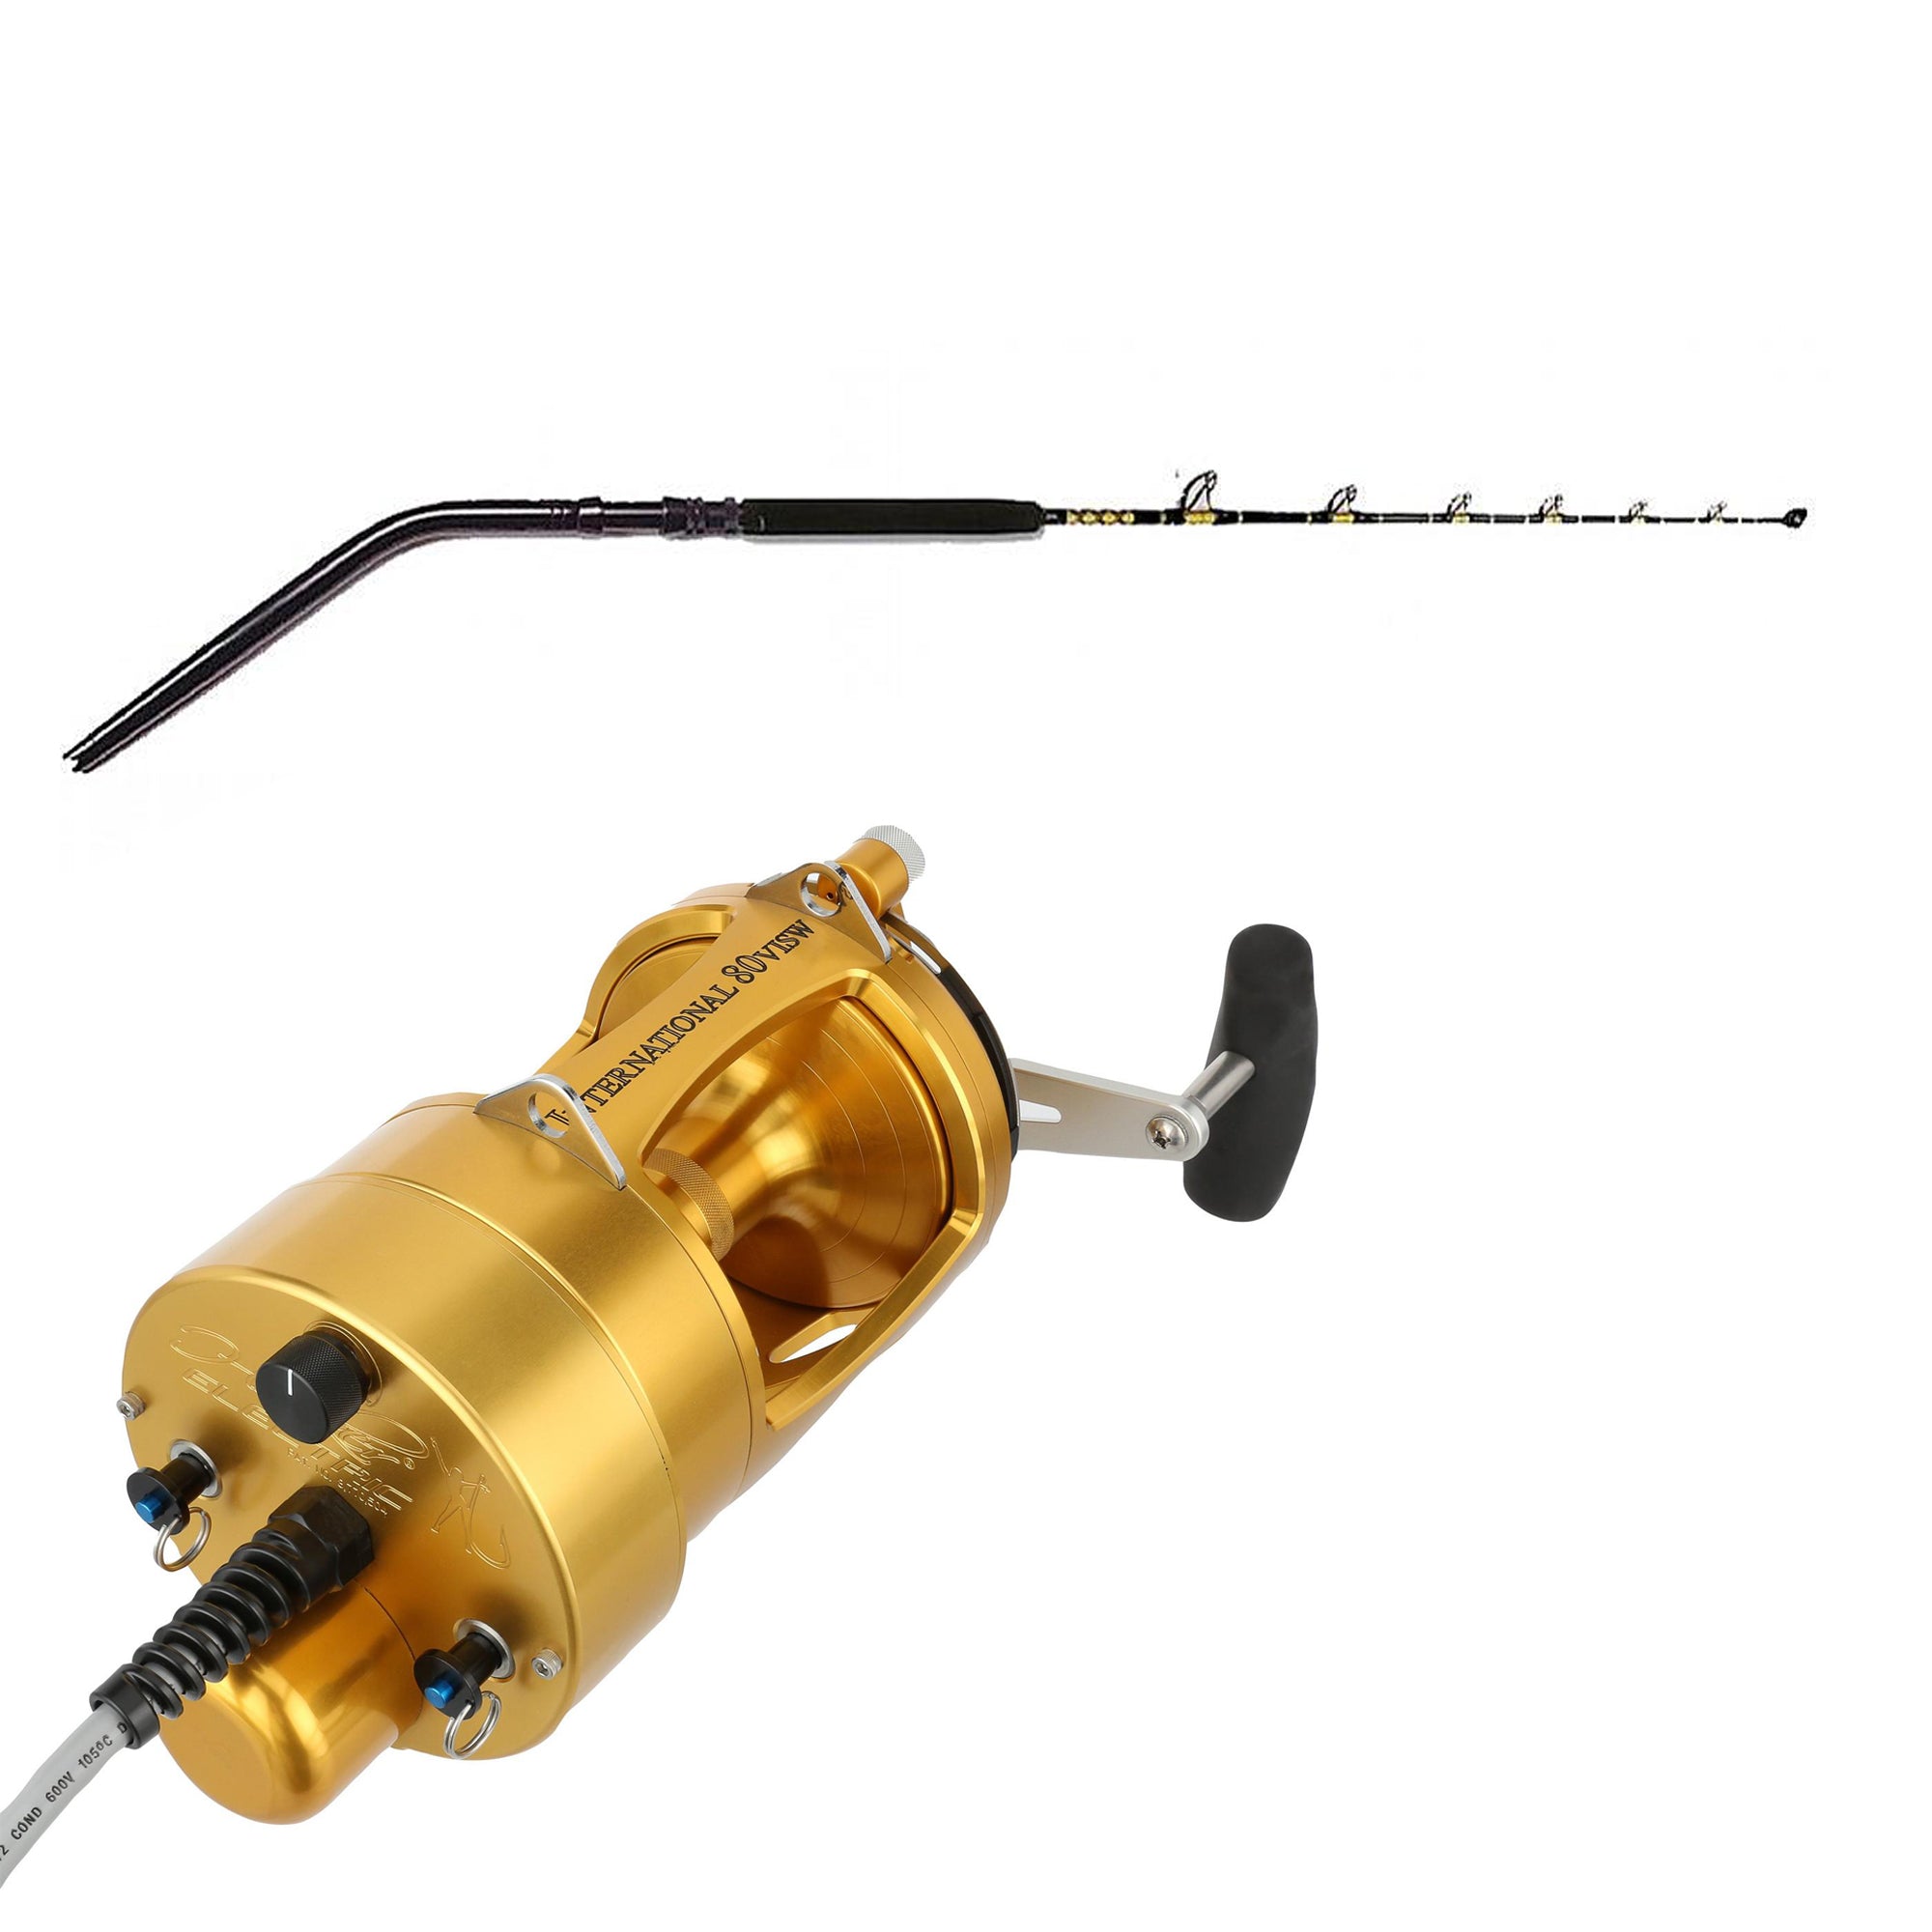 PENN International VI Hooker Electric 80 VISW Detachable Gold with Braid  and CHAOS Rodzilla 6-130, SW80 or SW50 from PENN/CHAOS - CHAOS Fishing